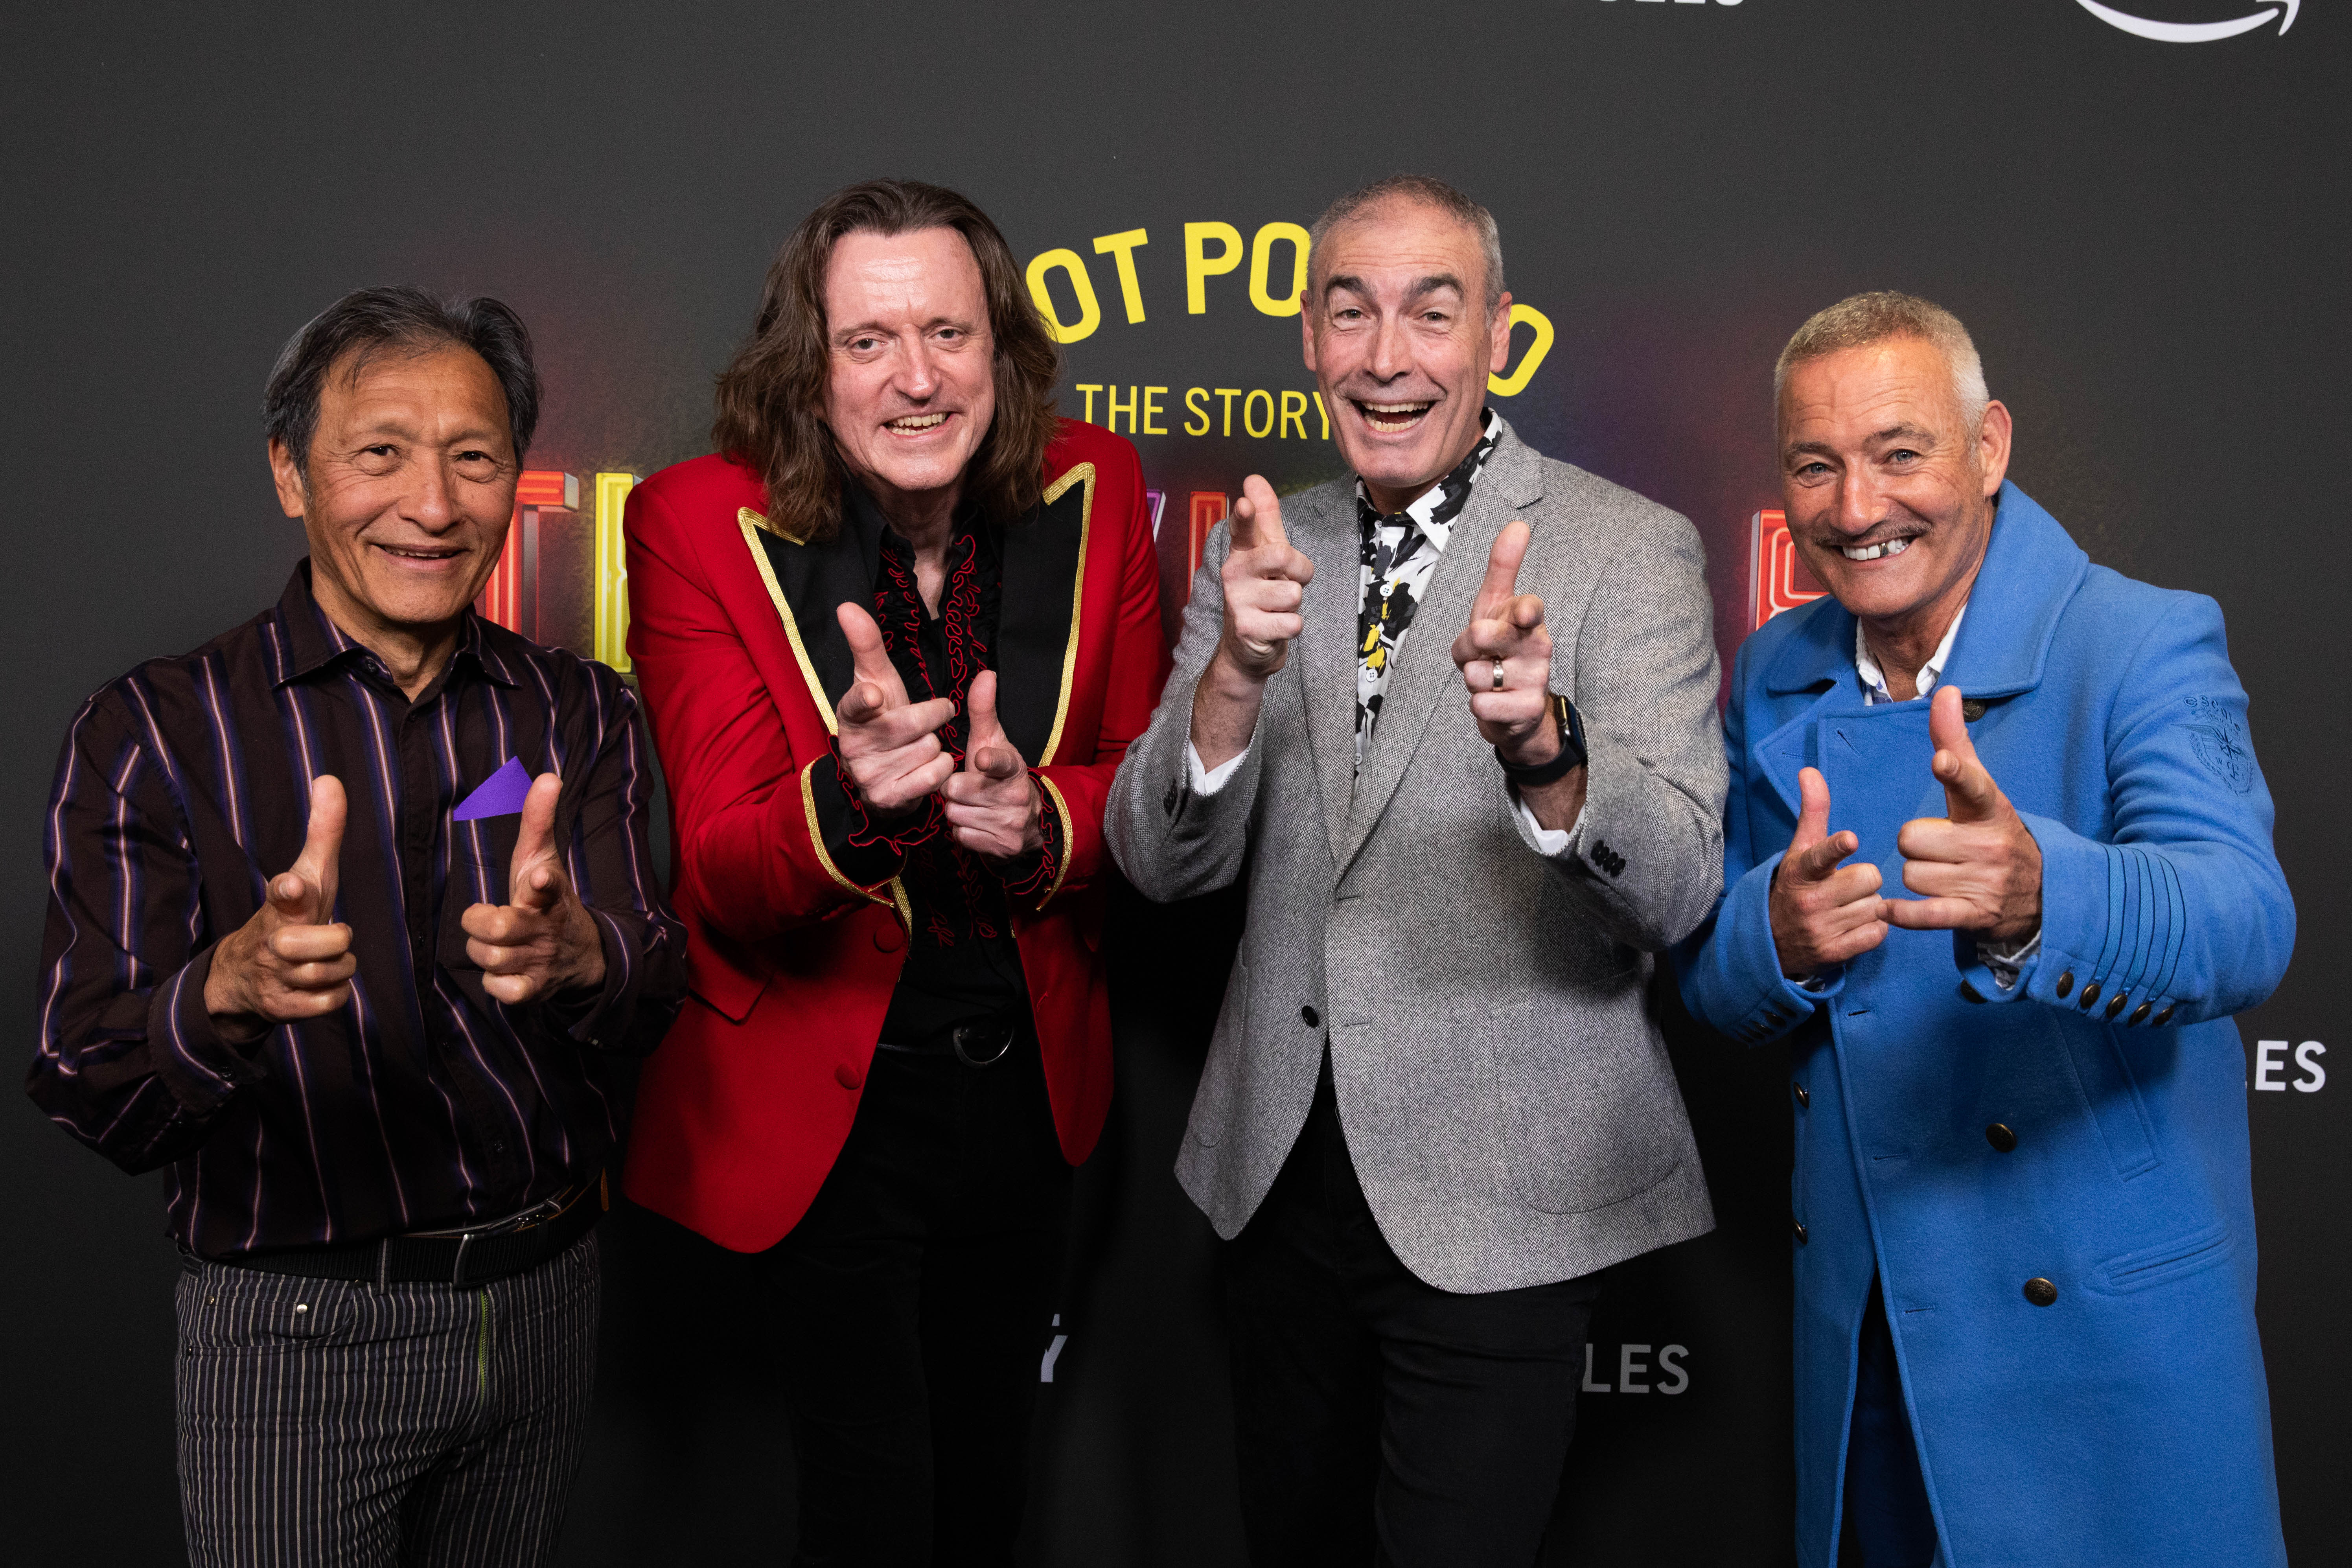 Prime Video: Hot Potato: The Story of The Wiggles